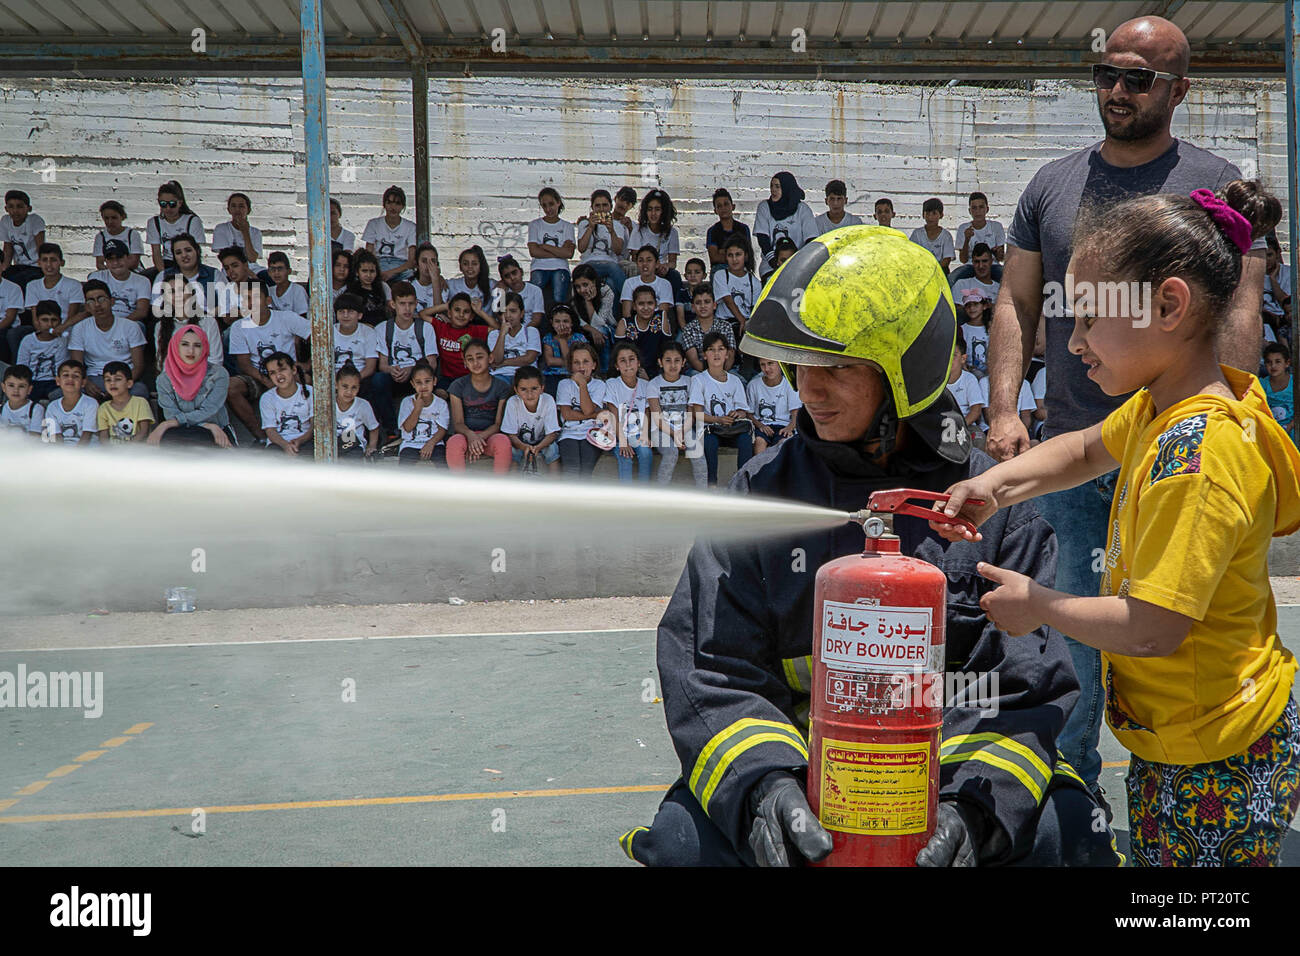 Bethlehem, Palestine. 15th Feb, 2018. Fire prevention seen being taught to the children during the summer camp.The Return Summer Camp was organised for children of the Aida refugee camp, it was established in 1950 by the Palestinians who were expelled from their homes from 27 towns throughout Palestine, namely Nasra, Tabaria, Jerusalem, Acre, Jaffa, Haifa and Hebron. This is a 4th generation of refugees, 130 children ranging from 4 to 16 years of age being overlooked by 20 instructors and volunteers and it was funded by the UN until 2000. (Credit Image: © Enzo Tomasiello/SOPA Images via Stock Photo